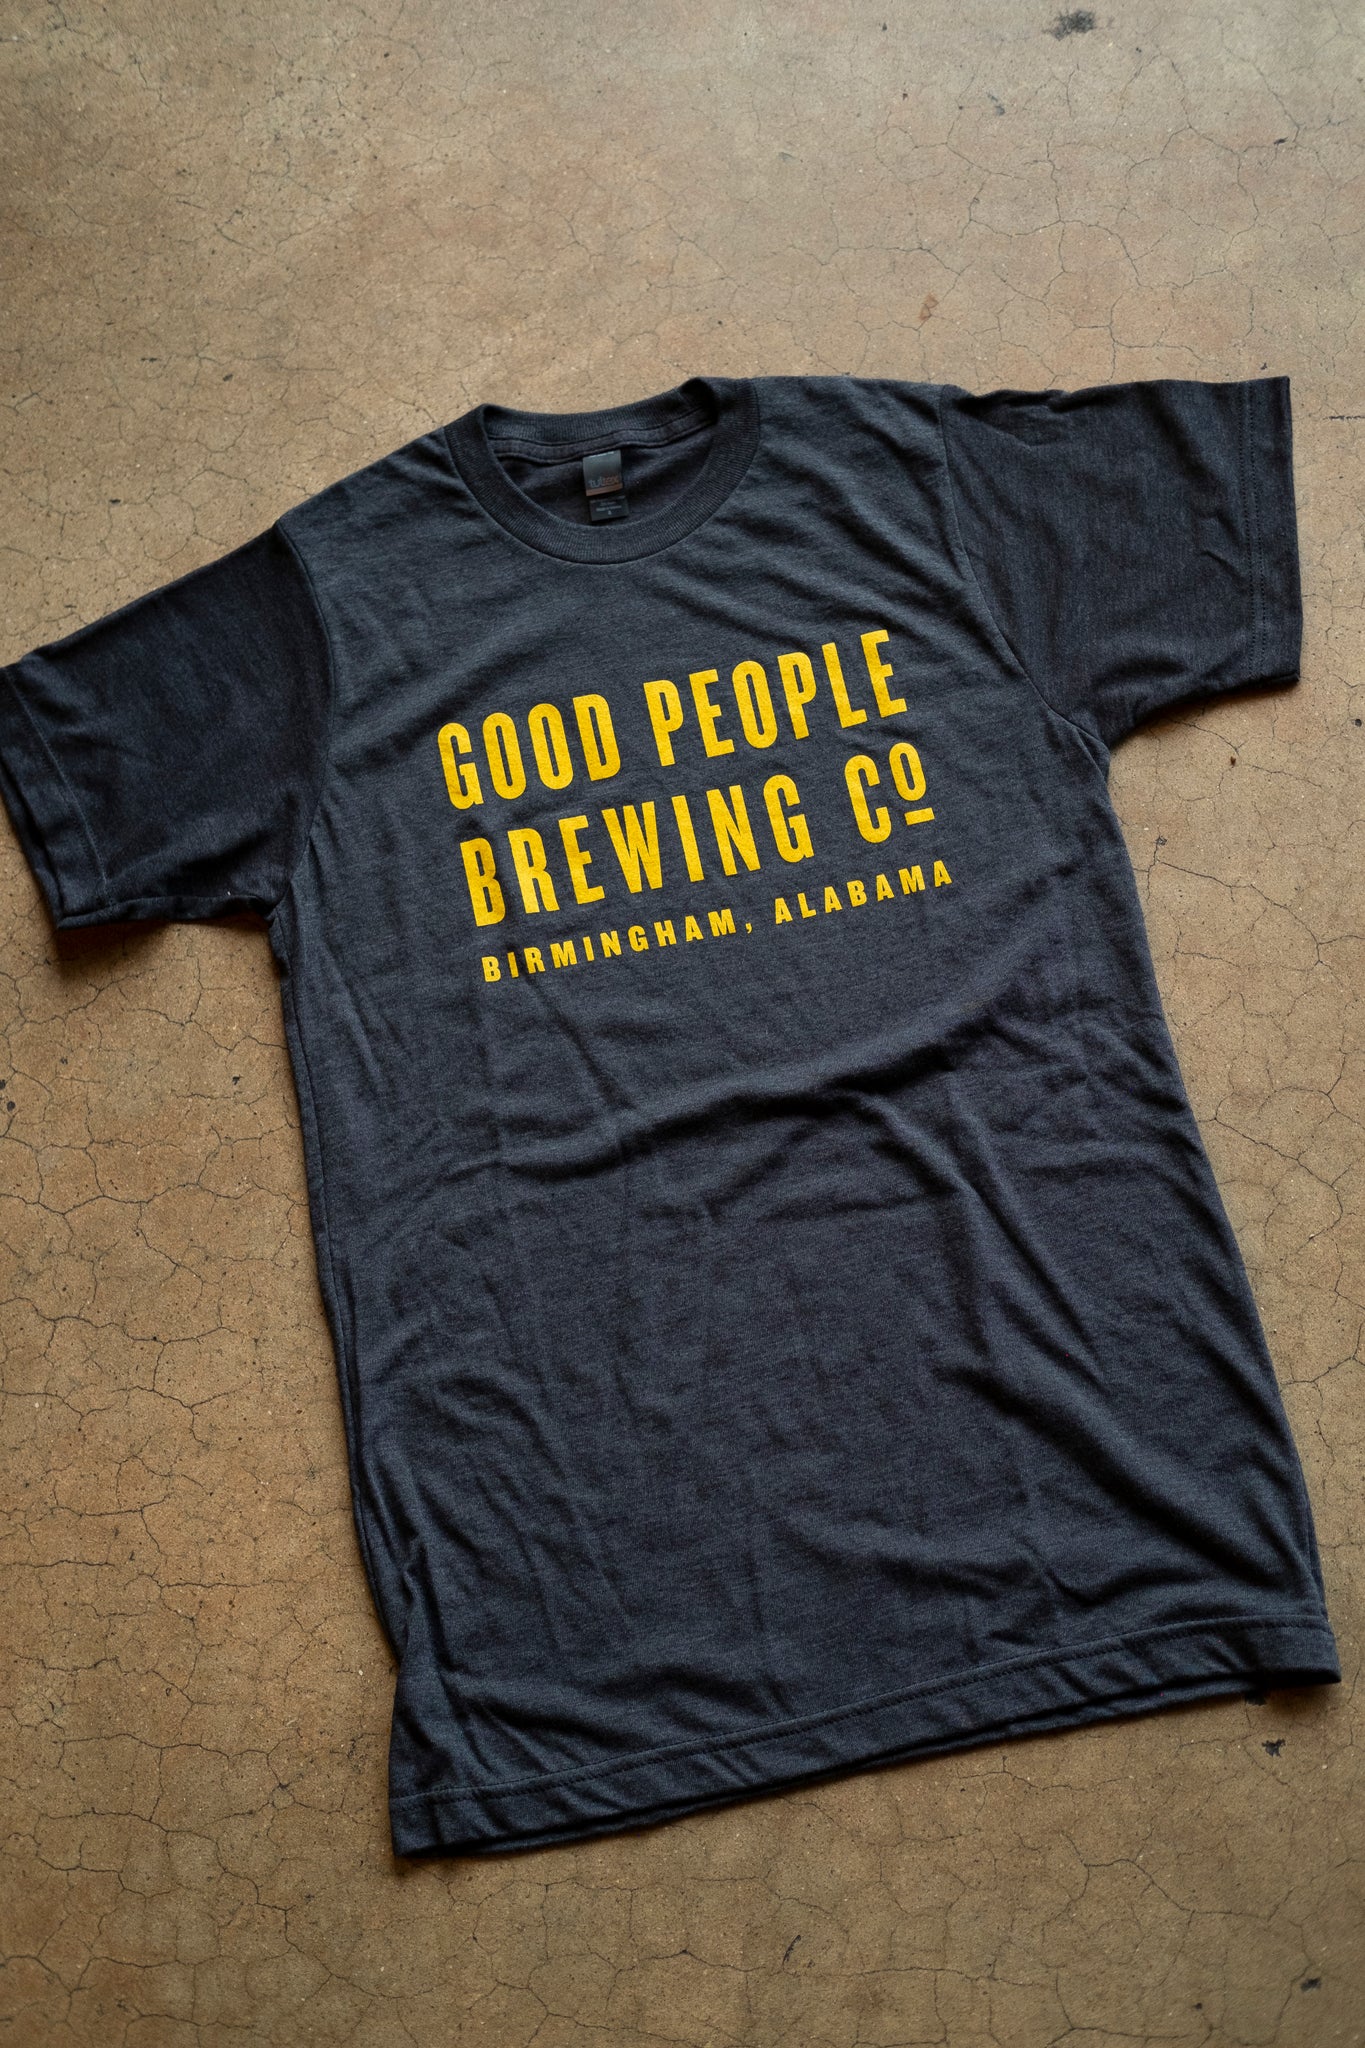 Good People Brewing Co. Text T-Shirt